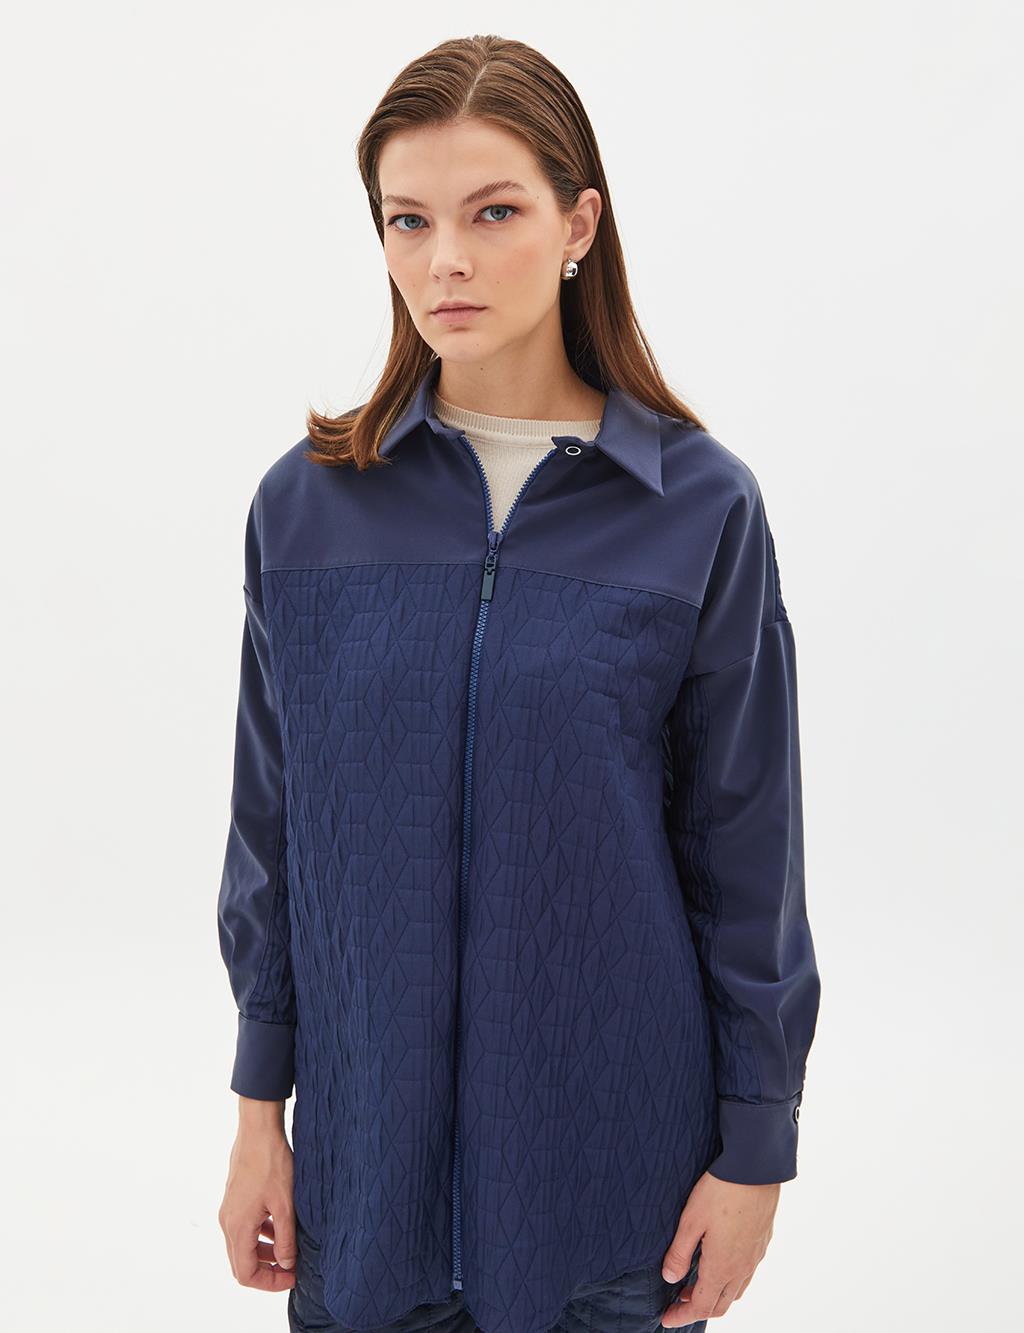 Iconic Textured Zipper Blouse Navy Blue